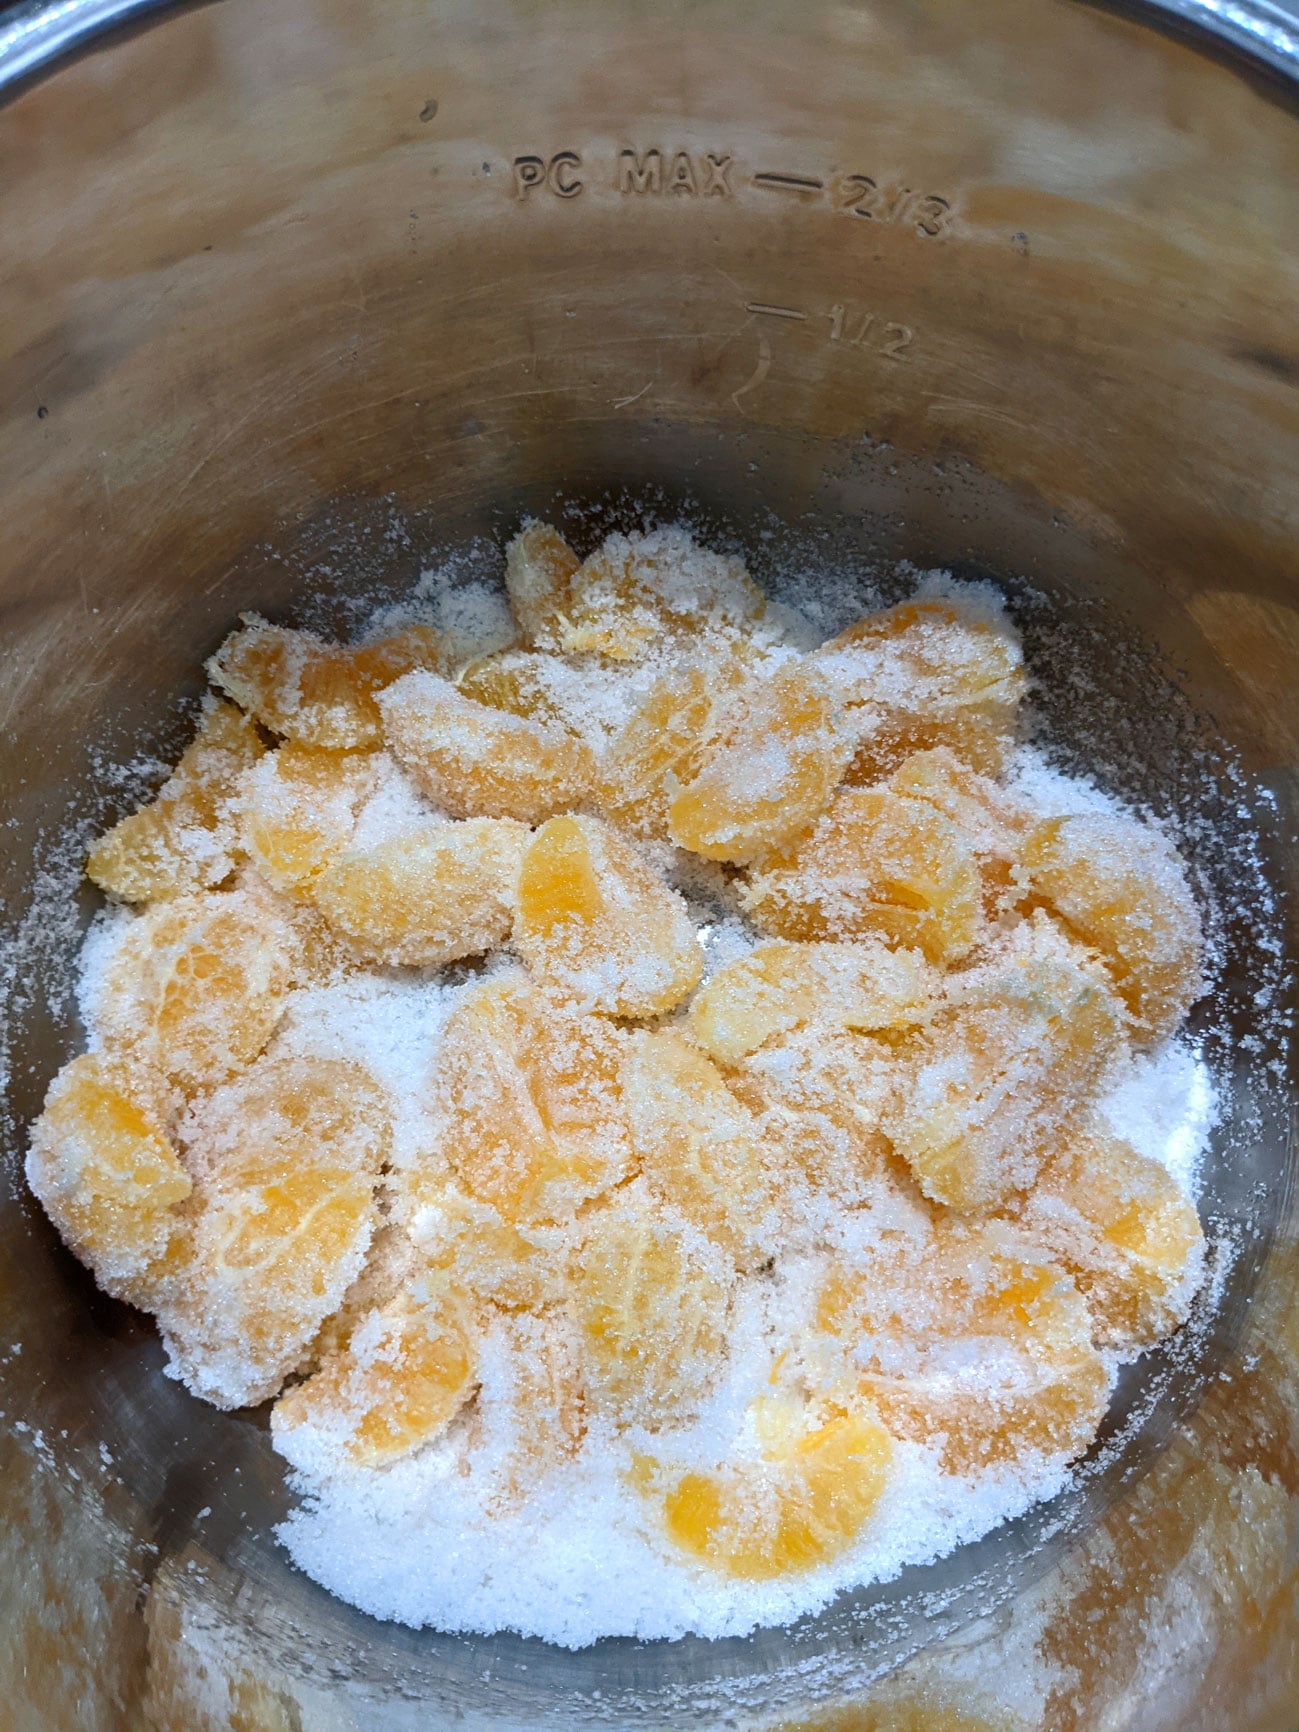 oranges mixed with sugar